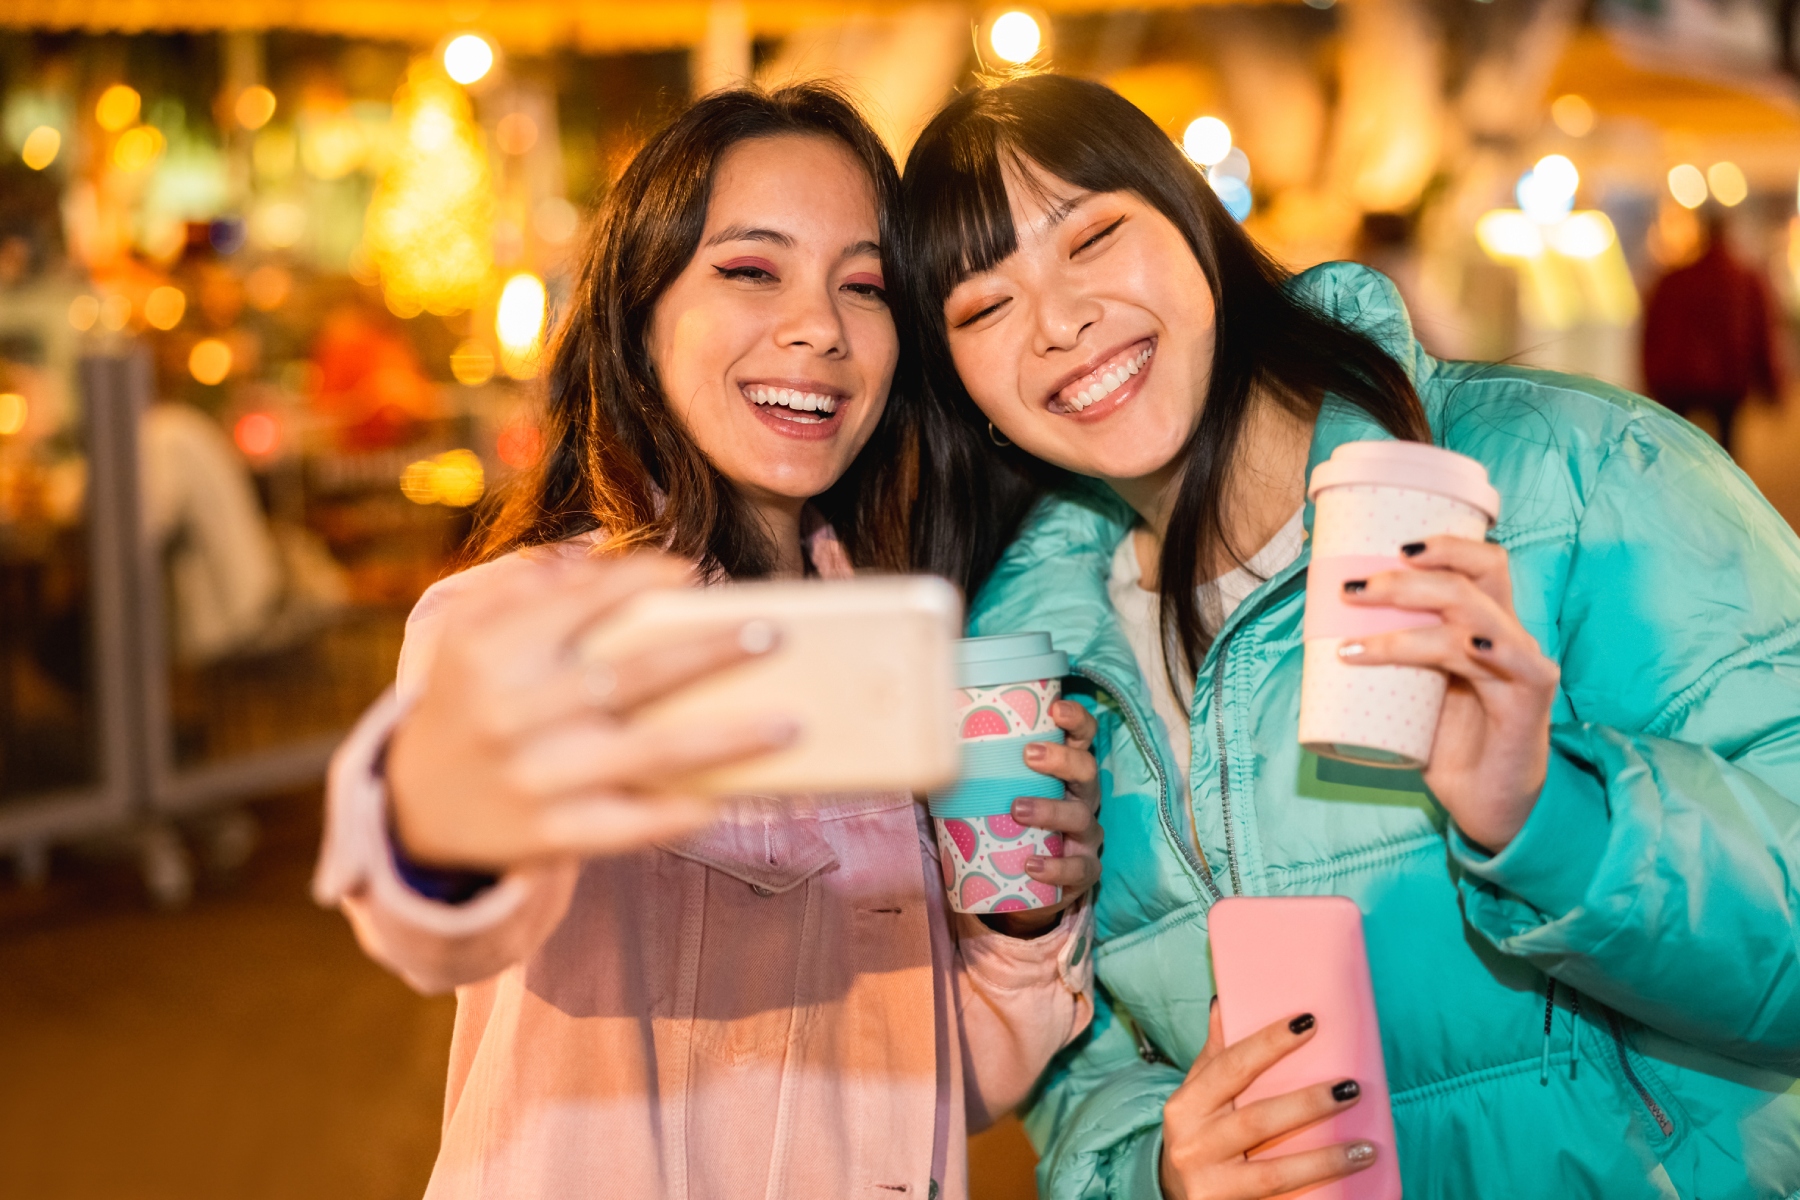 Two young women taking a selfie while holding reusable coffee cups
